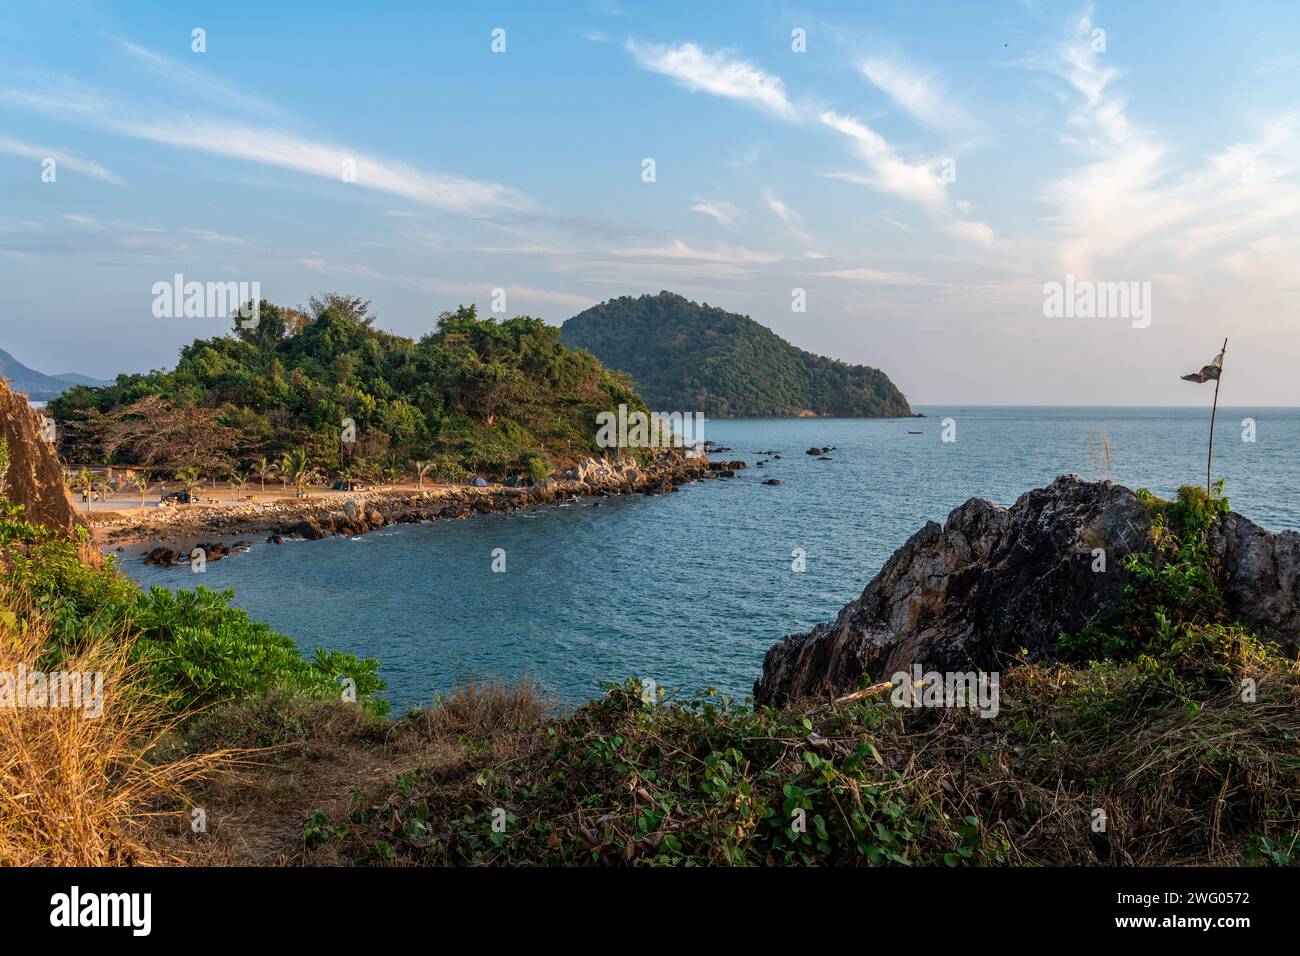 Beautiful view of evening sunset at the Noen Nangphaya view point looking out to the ocean and distant islands in Chonburi, Thailand Stock Photo